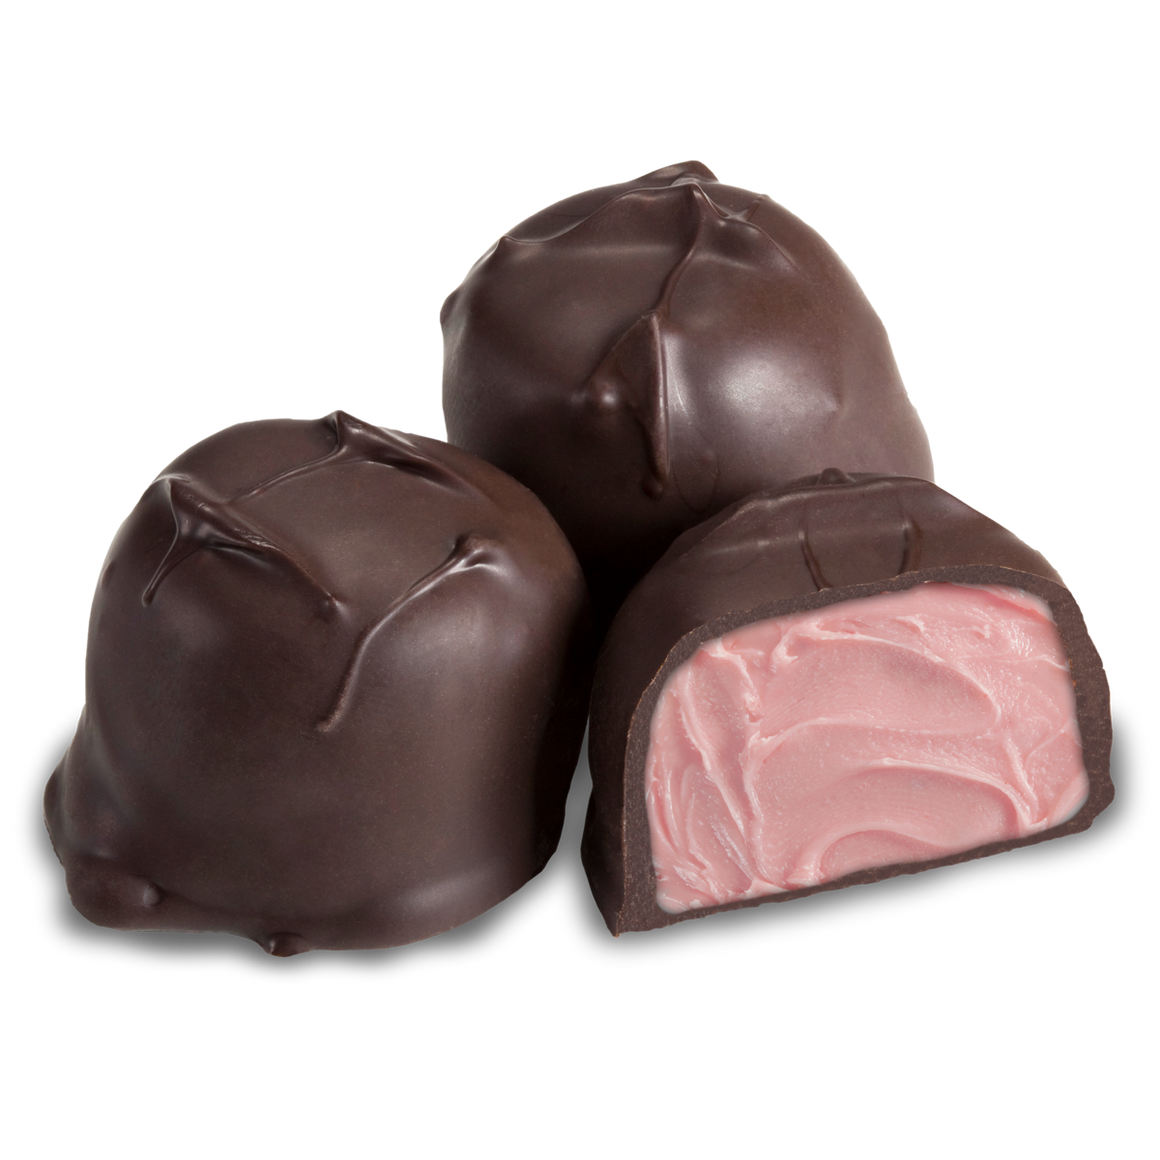 All City Candy Dark Chocolate Raspberry Creams - 1 LB Box Chocolate Albanese Confectionery For fresh candy and great service, visit www.allcitycandy.com